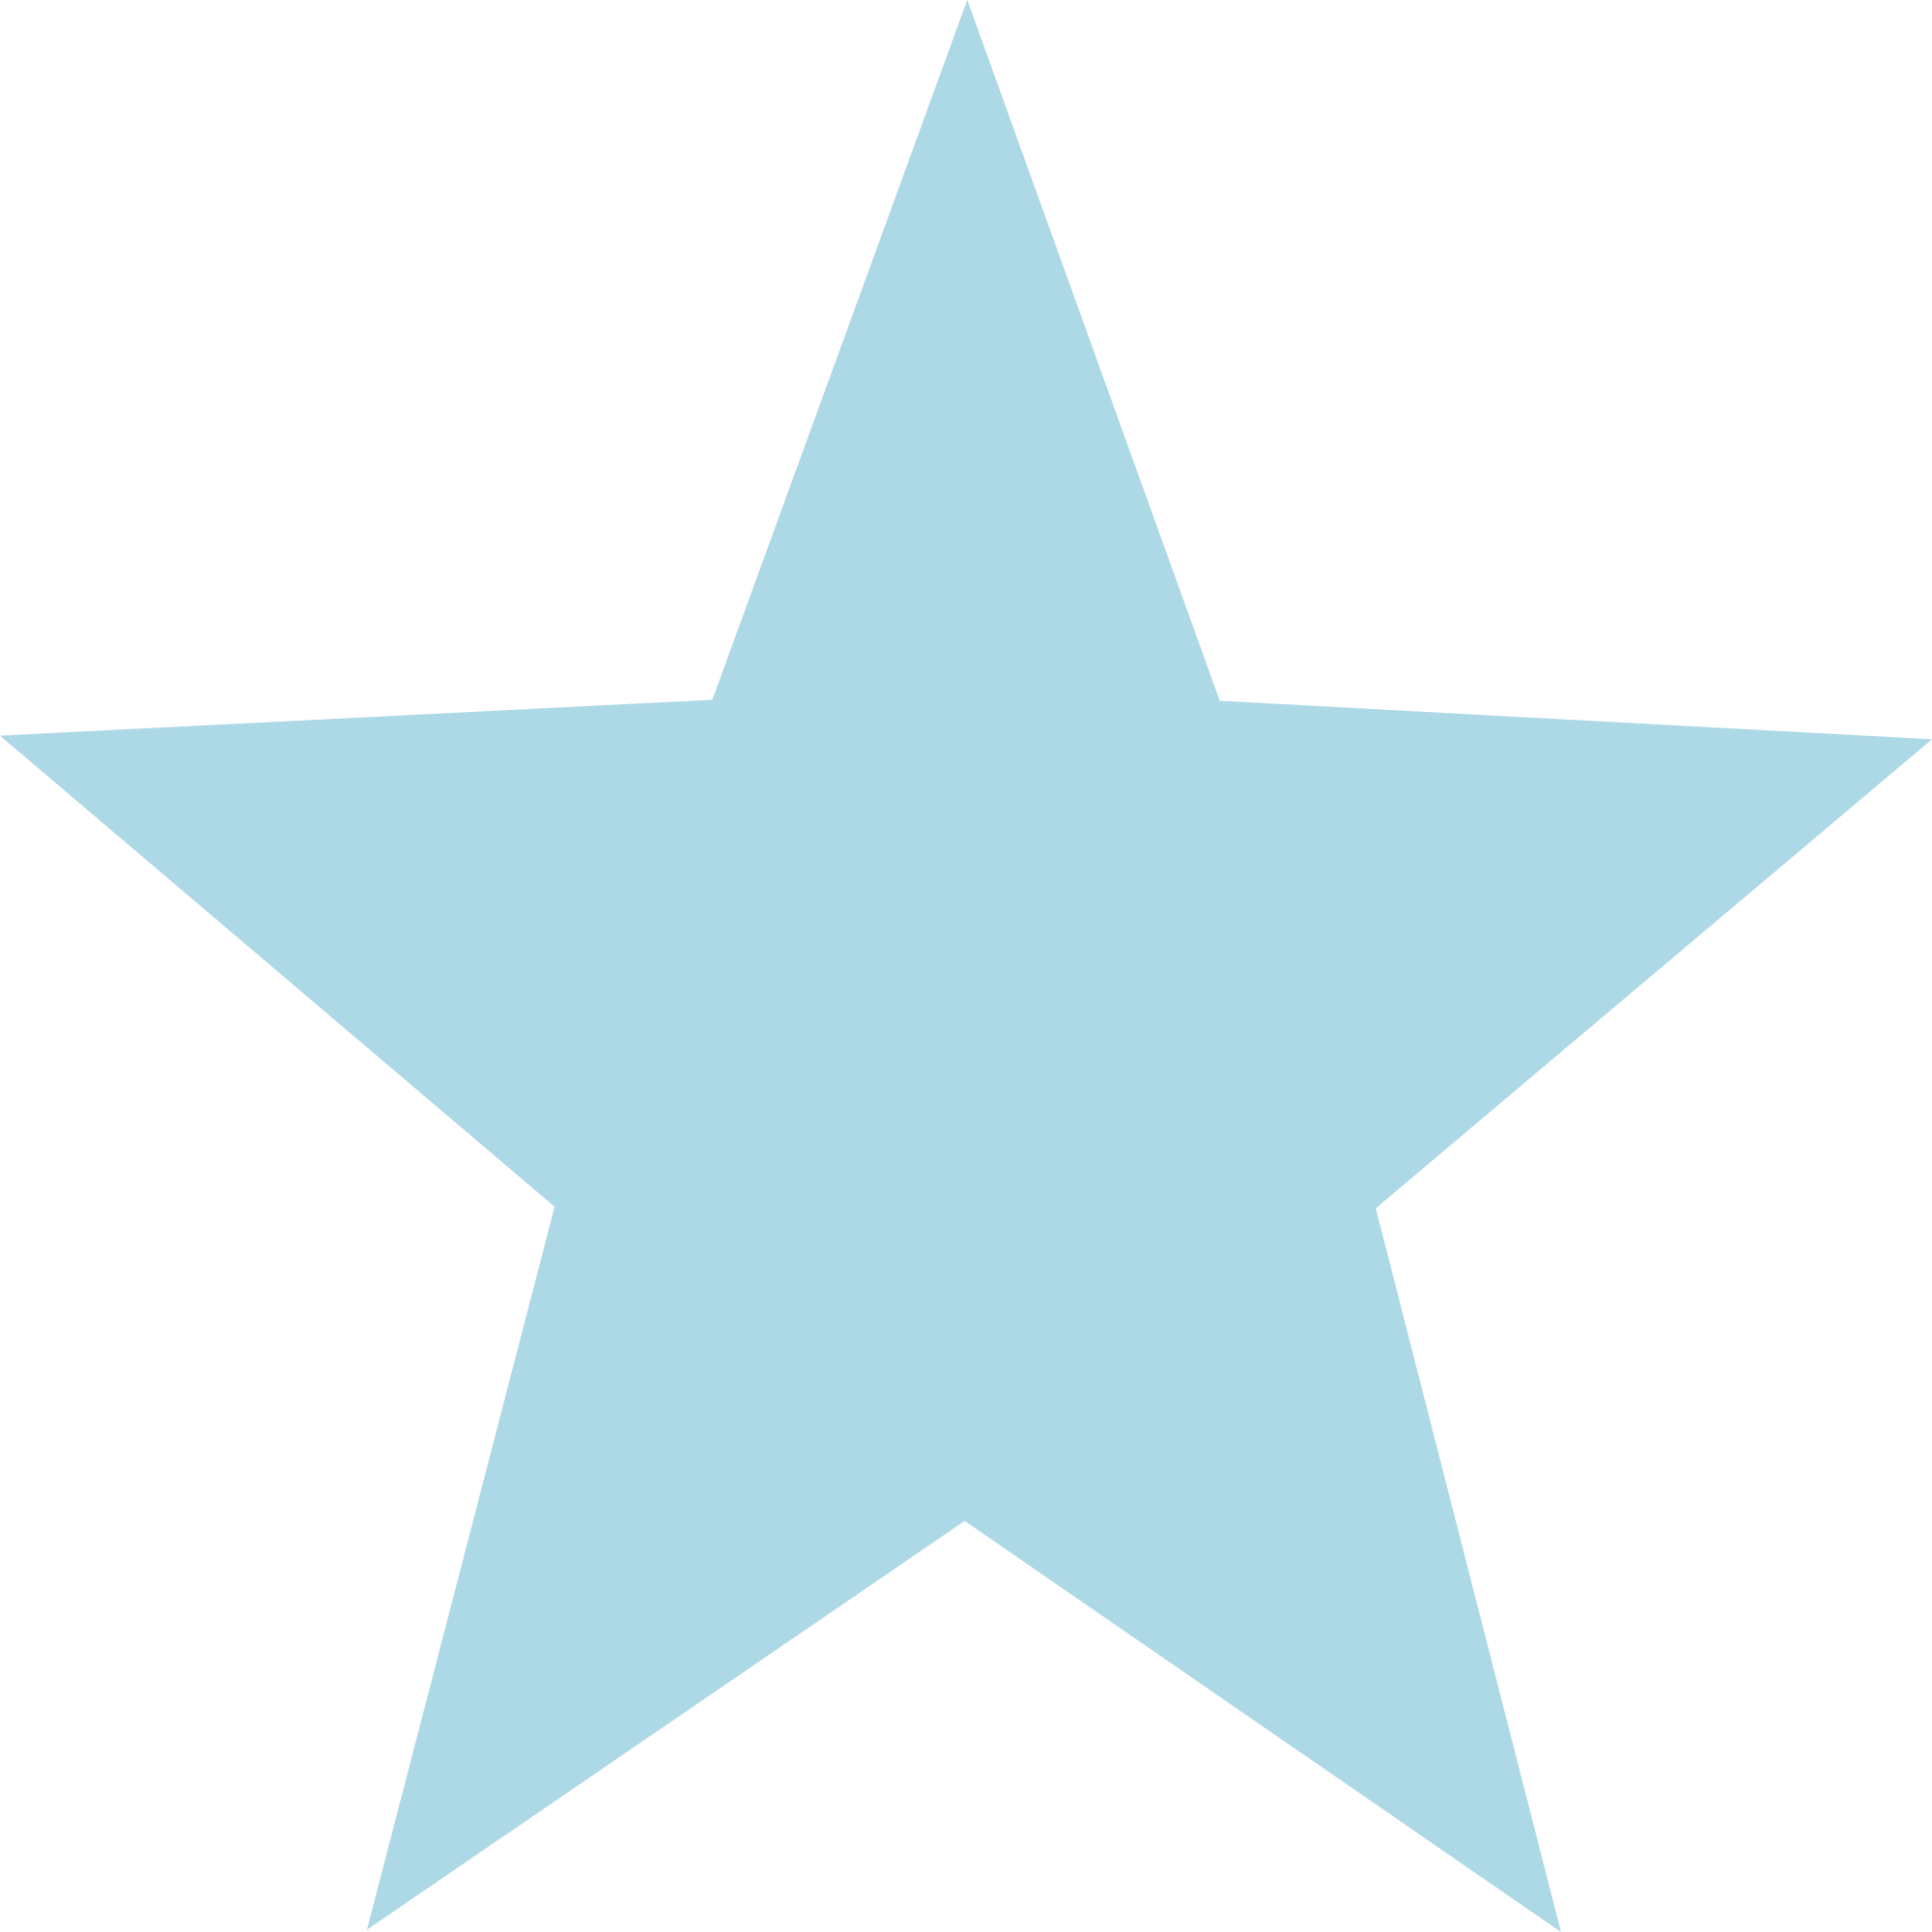 Free Blue Star Download Free Blue Star Png Images Free Cliparts On